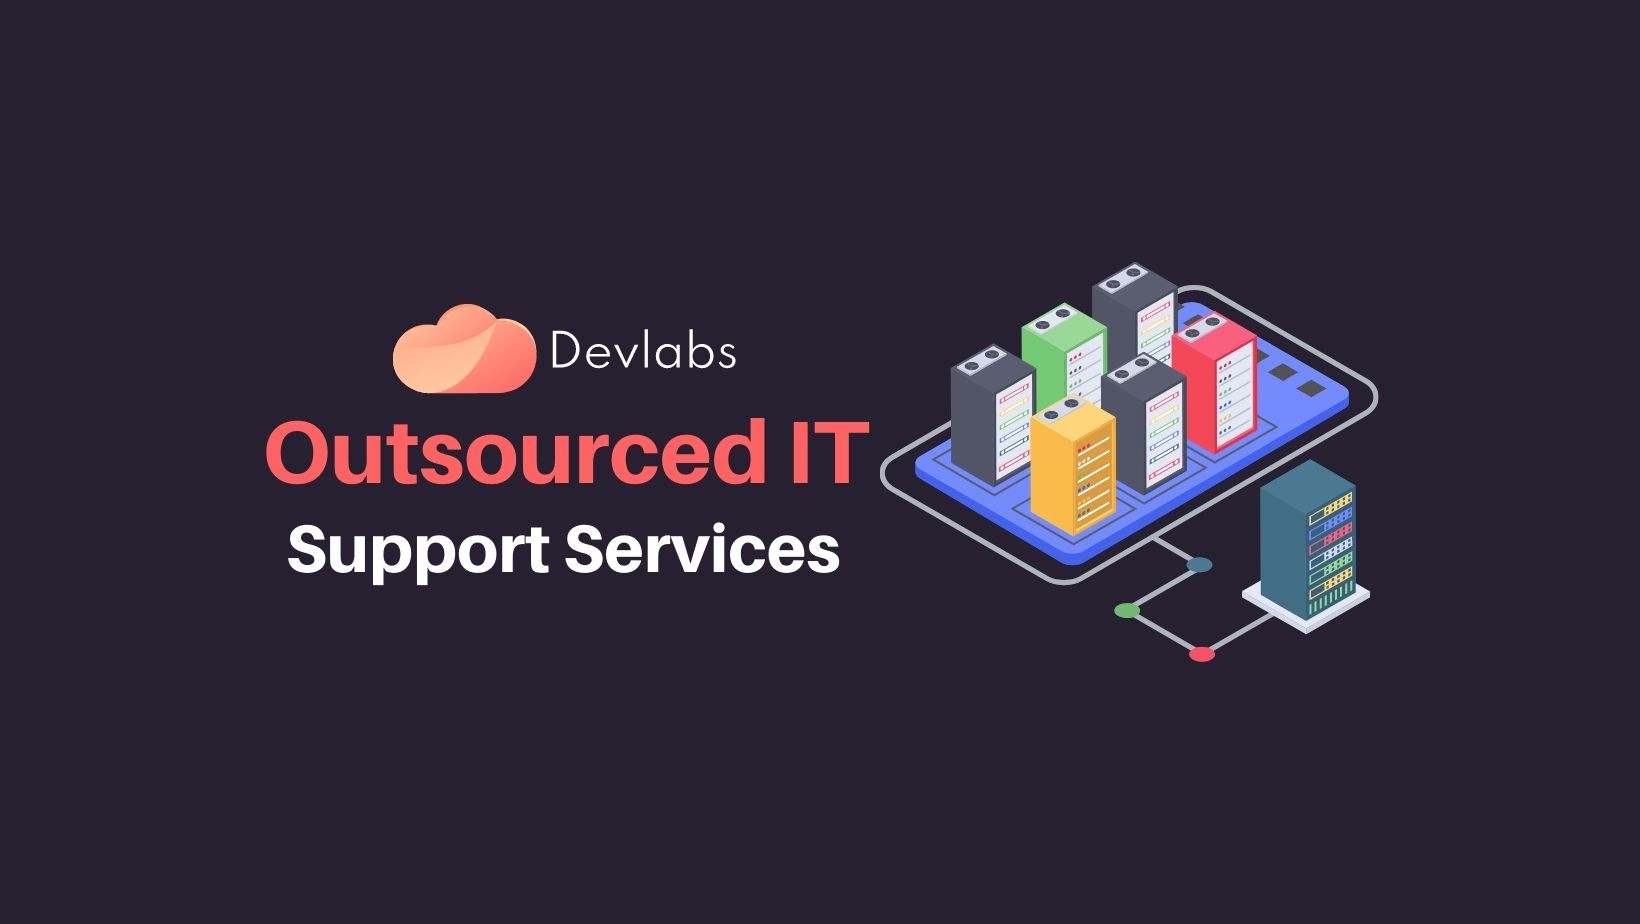 Outsourced IT Support Services - Devlabs Global